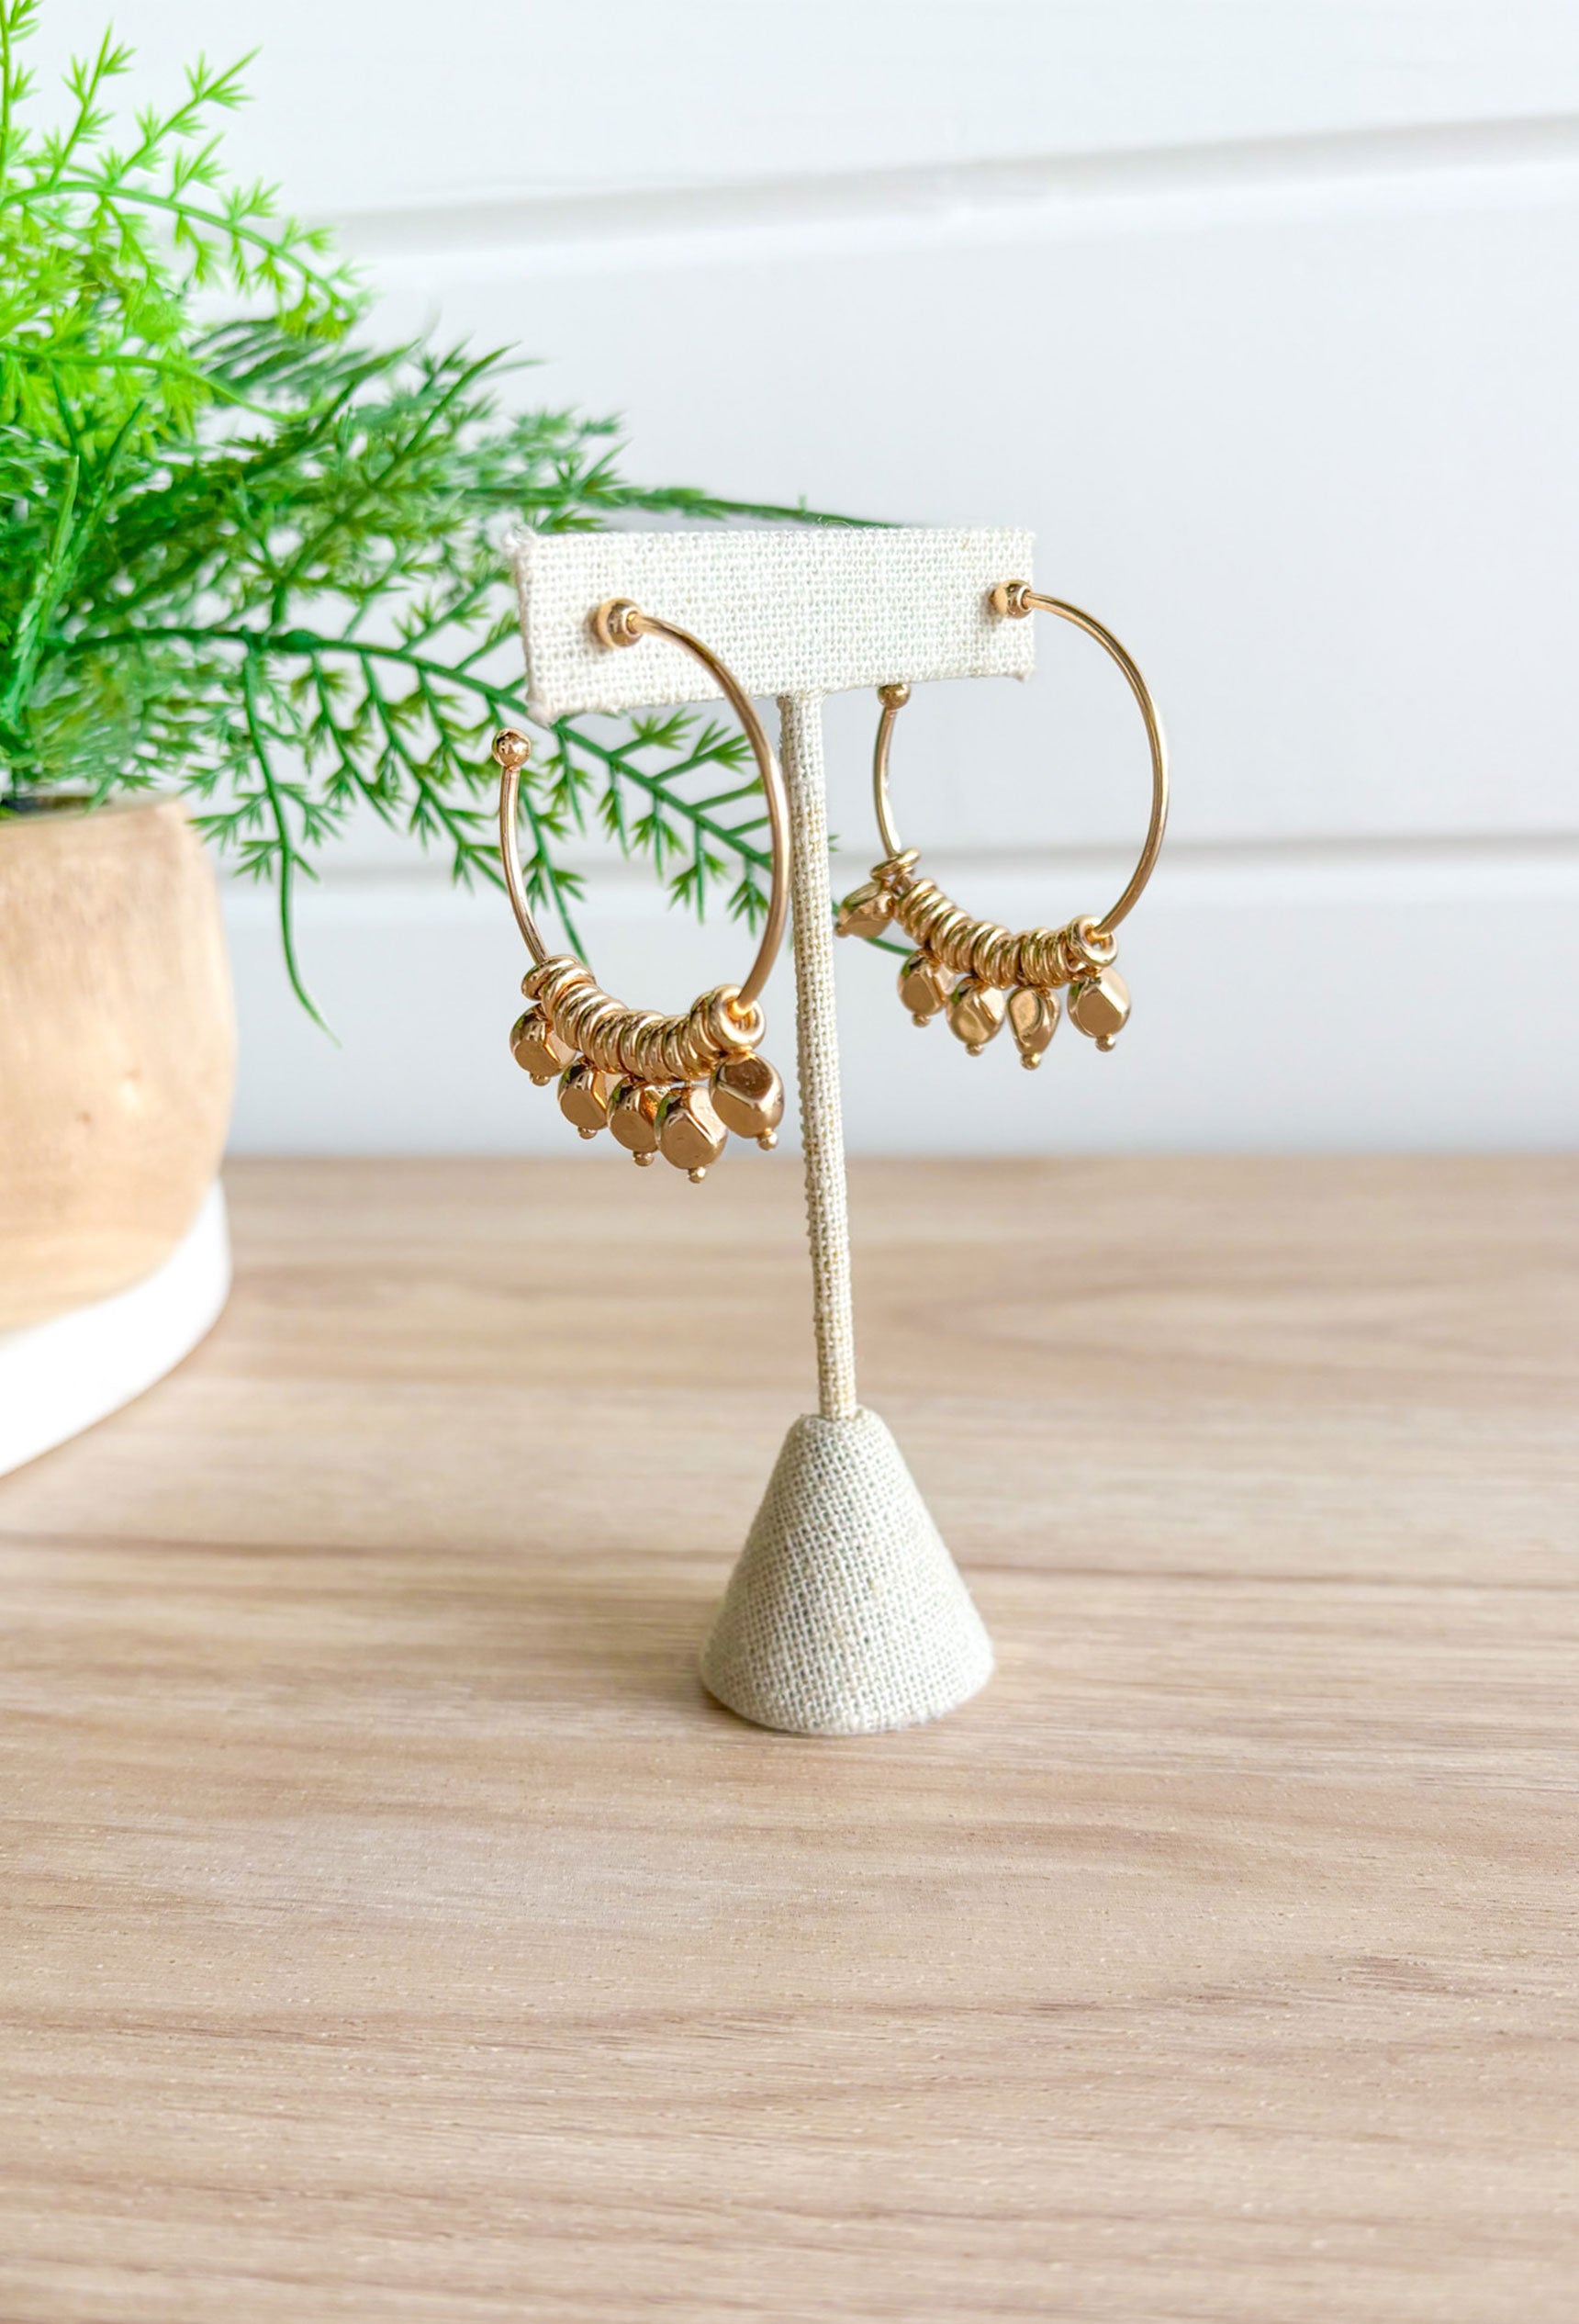 City Escape Earrings in Gold, gold hoop with ring and bead detailing that move around the hoop